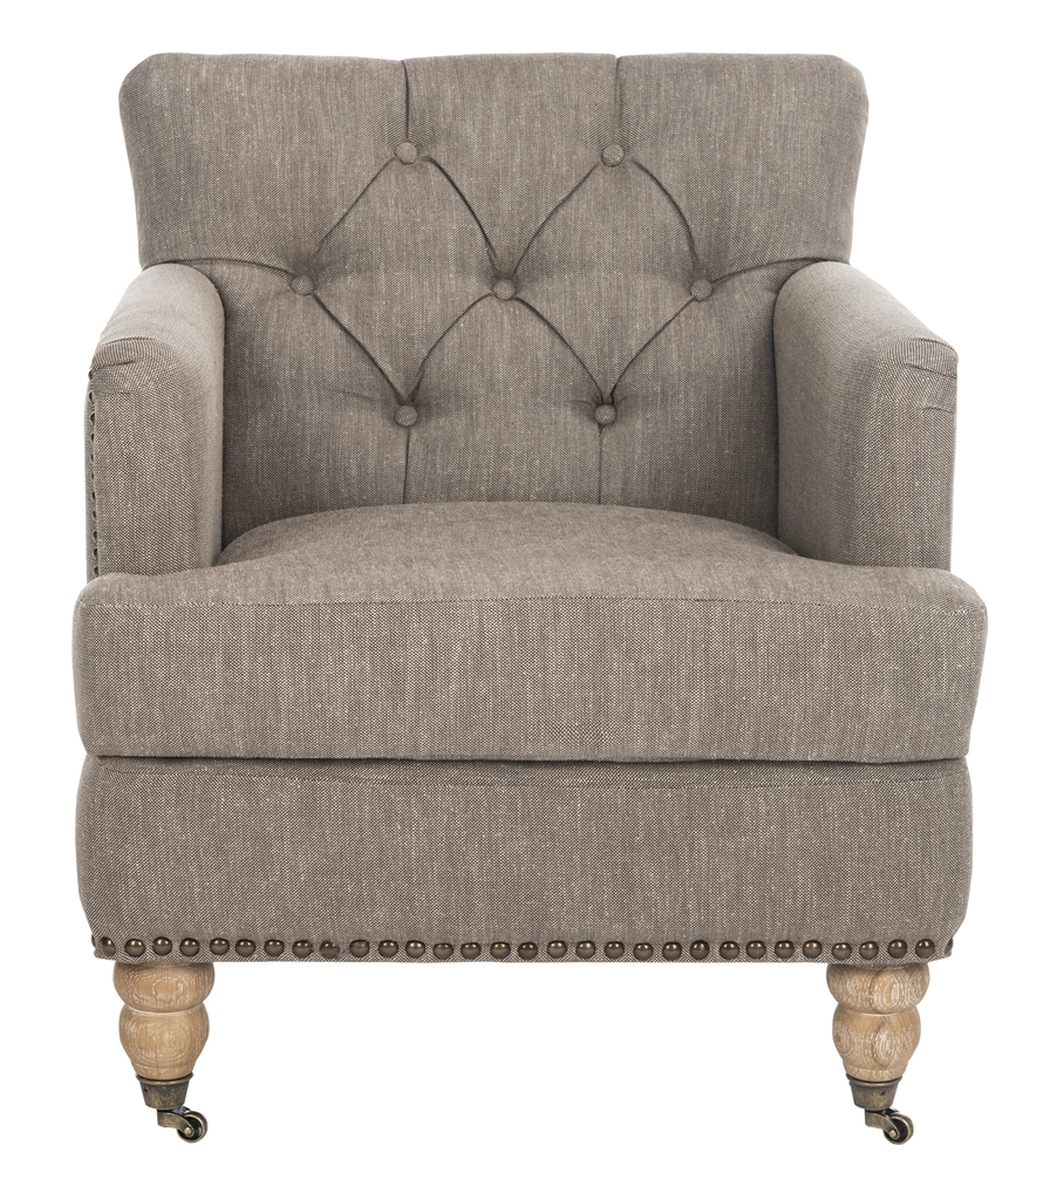 Colin Tufted Club Chair - Taupe/White Wash - Arlo Home - Image 0